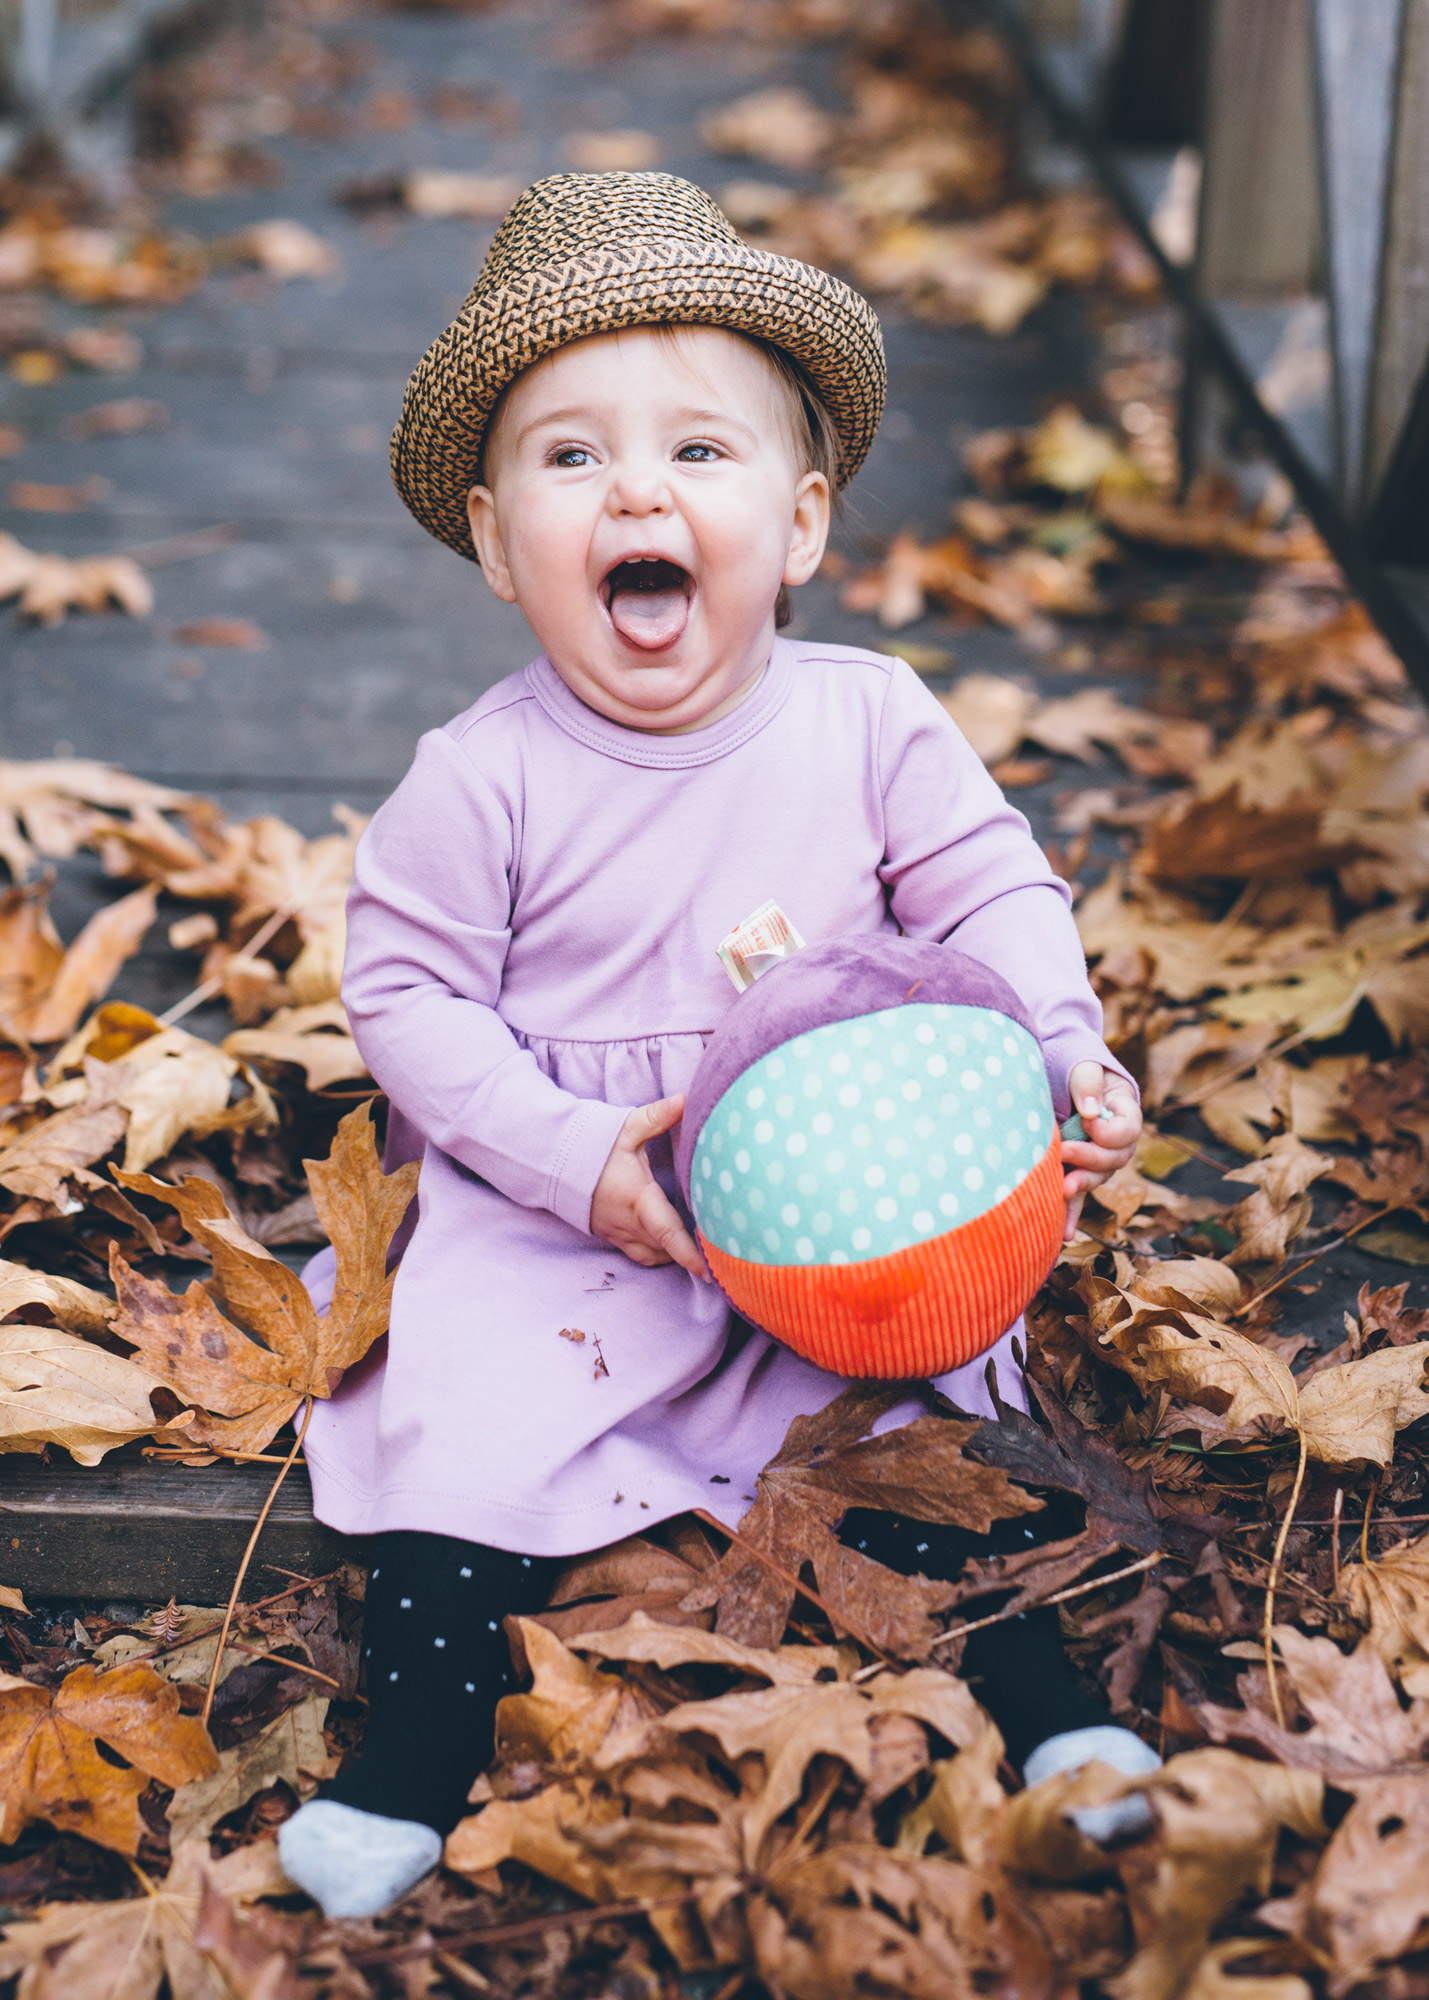 baby-wearing-a-hat-and-smiling-huge-with-a-ball-in-hands.jpg